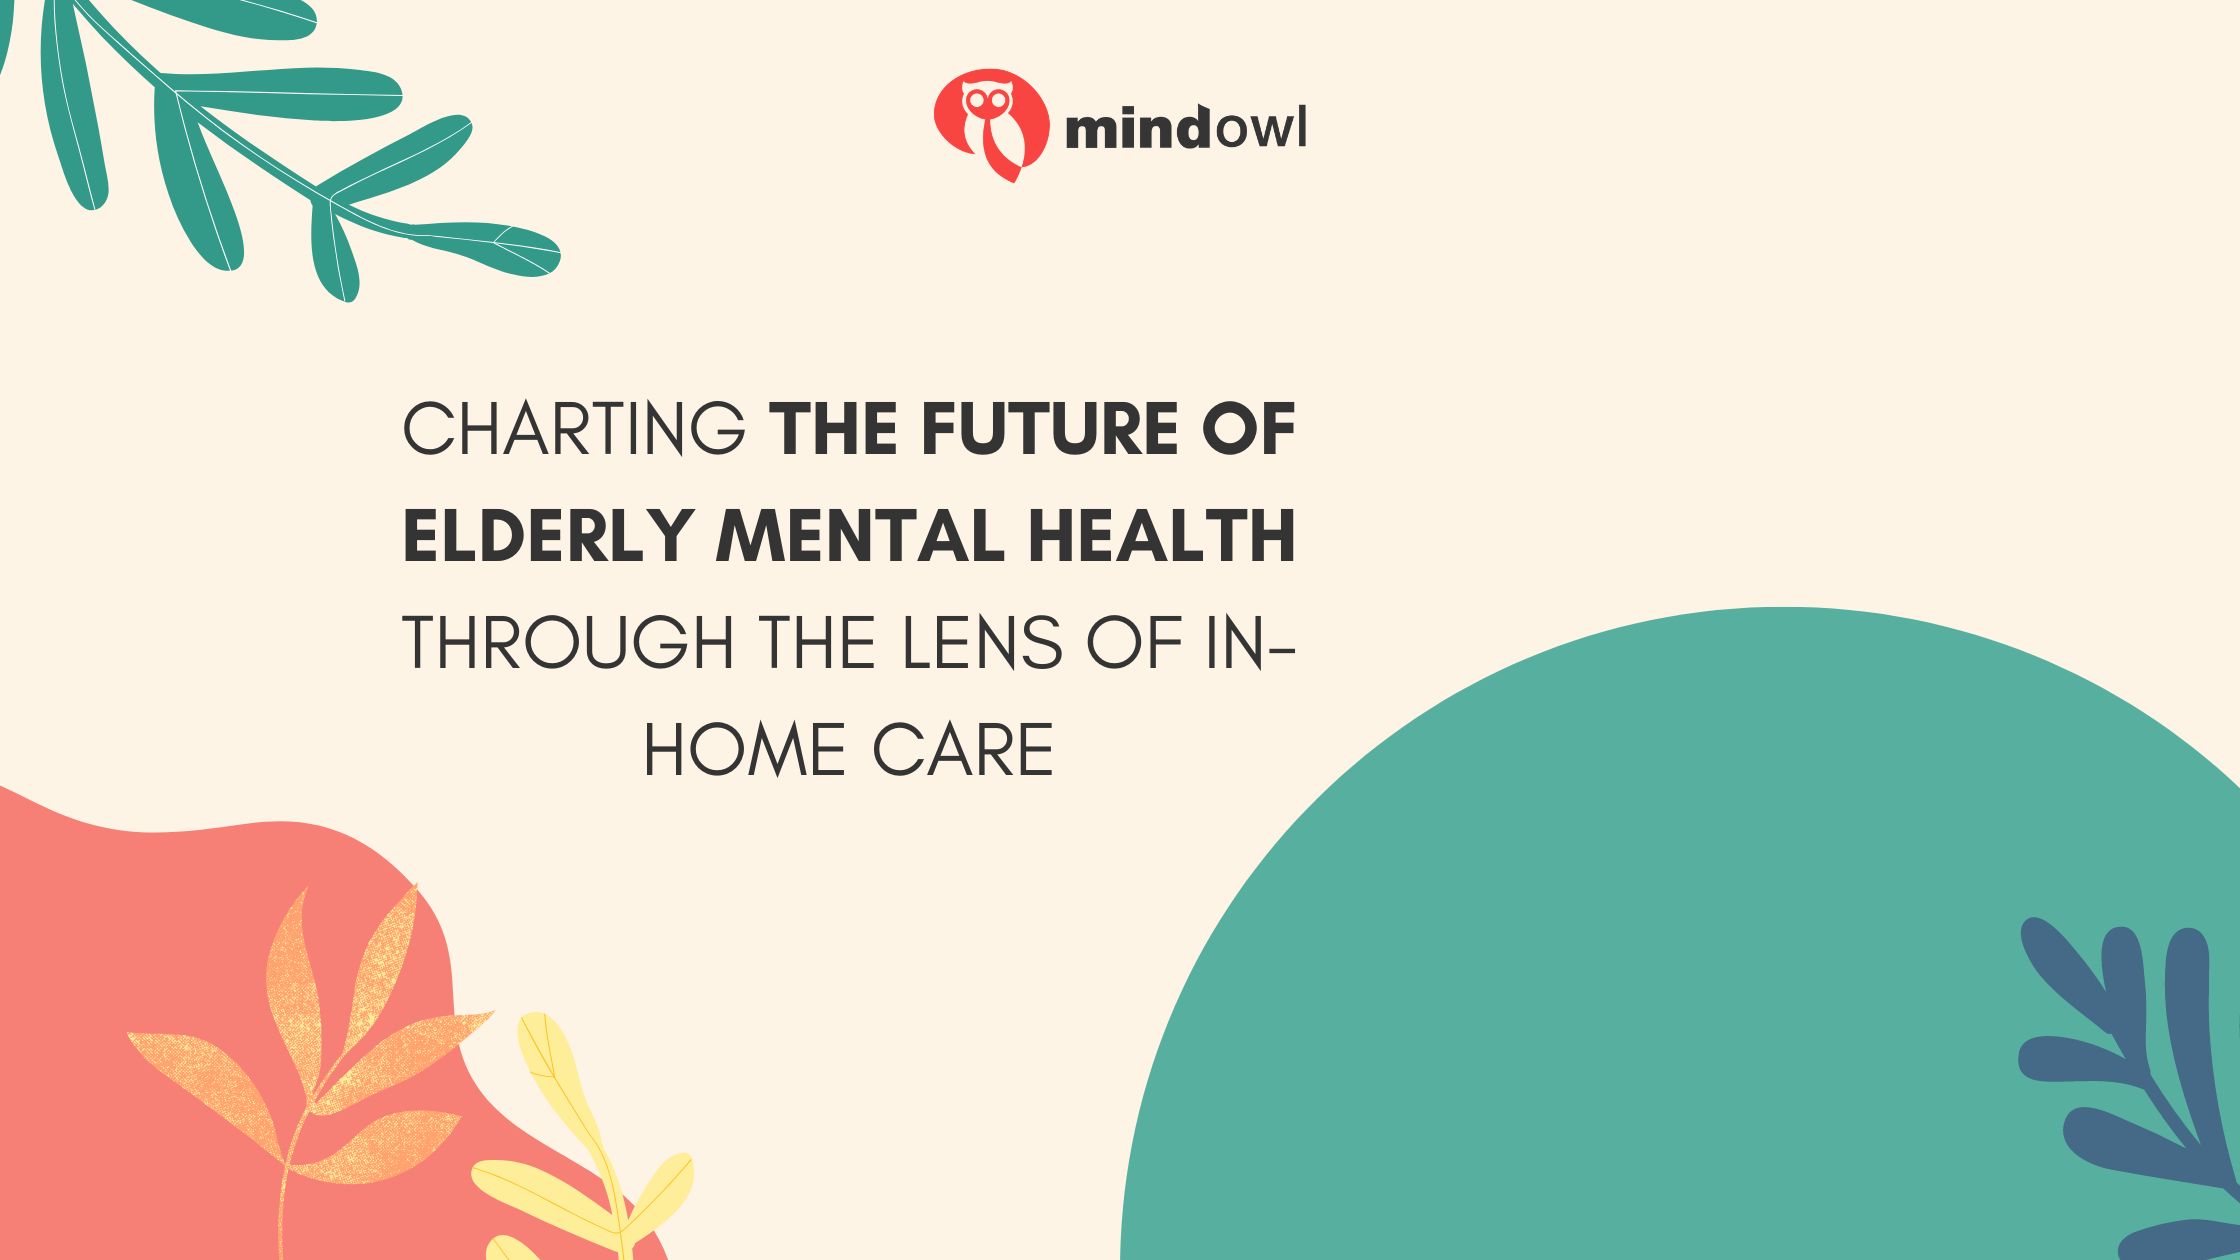 Charting the Future of Elderly Mental Health Through the Lens of In-Home Care